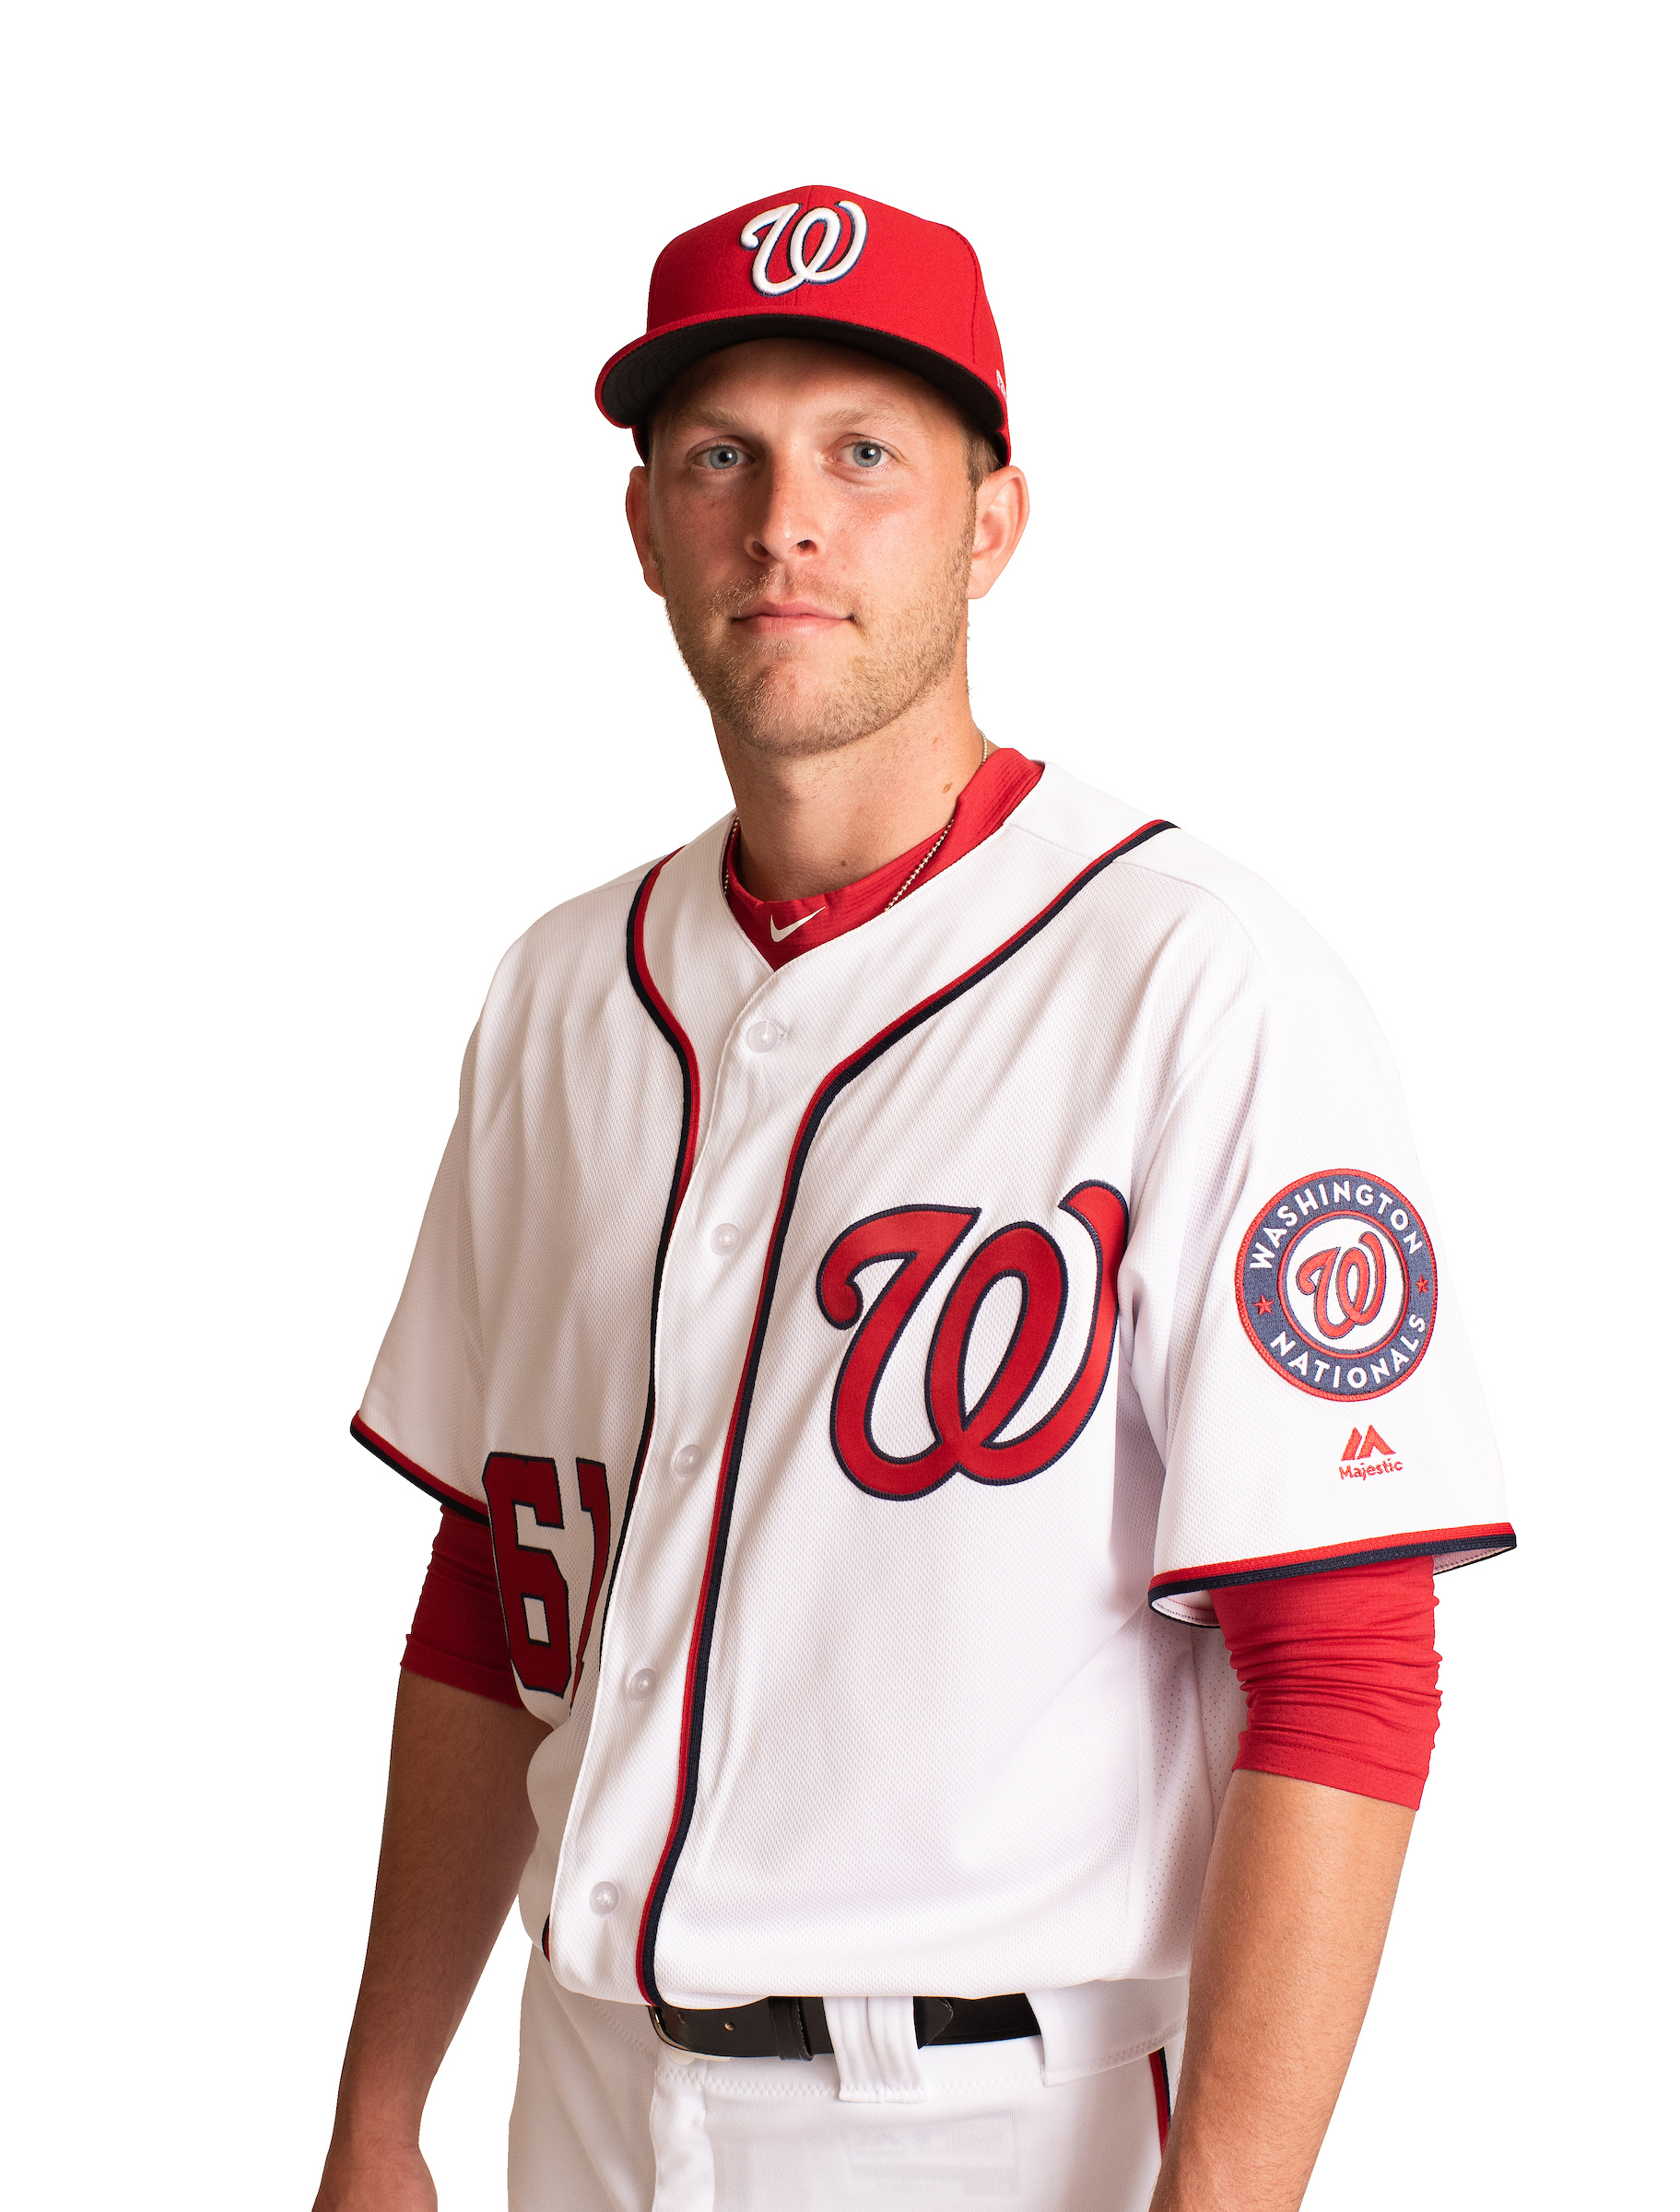 Sag Harbor native Kyle McGowin earned his first major league win with the Washington Nationals.